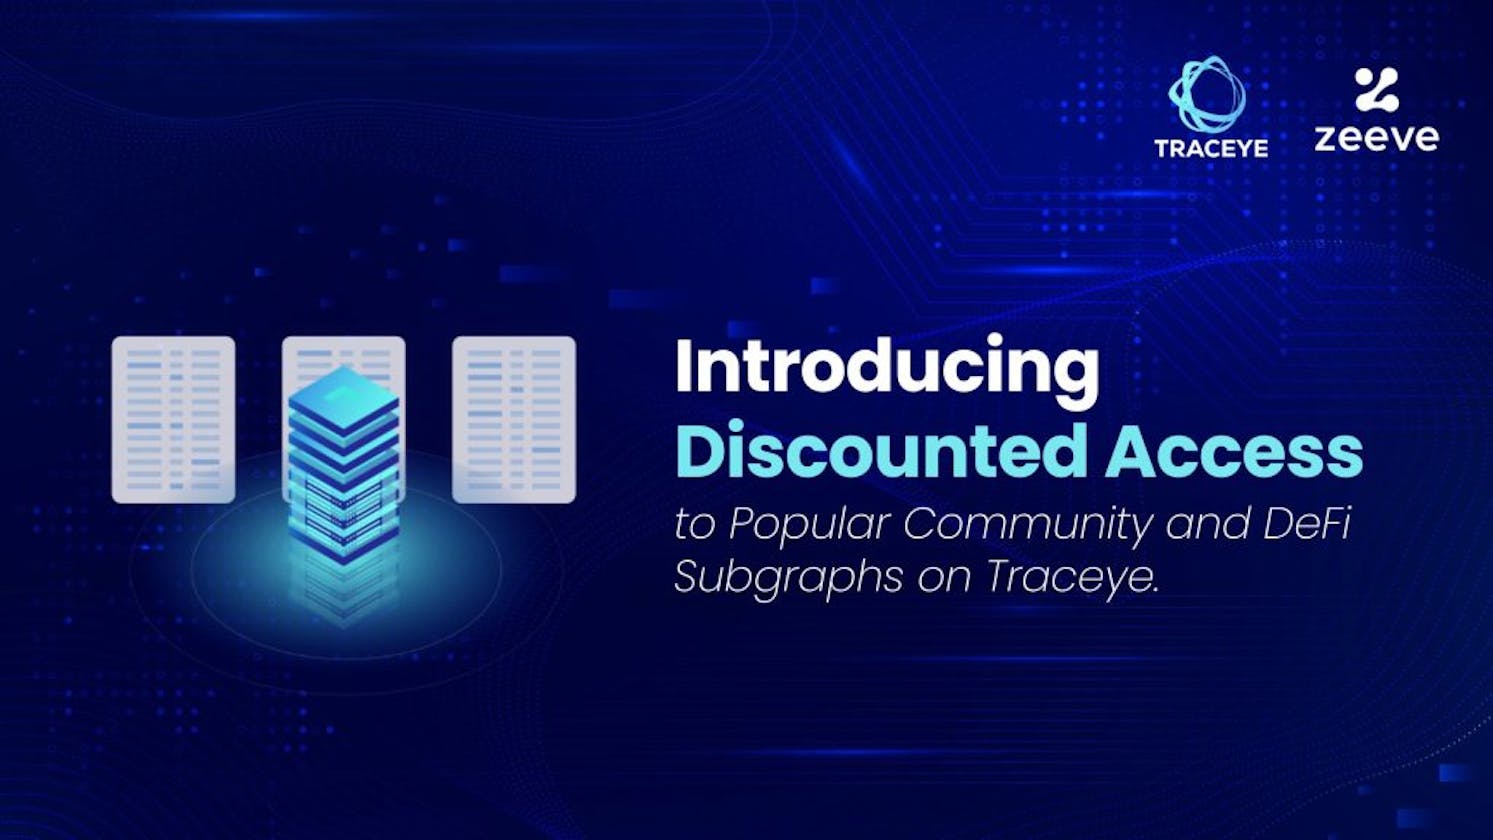 Introducing Discounted Access to Popular Community and DeFi Subgraphs on Traceye